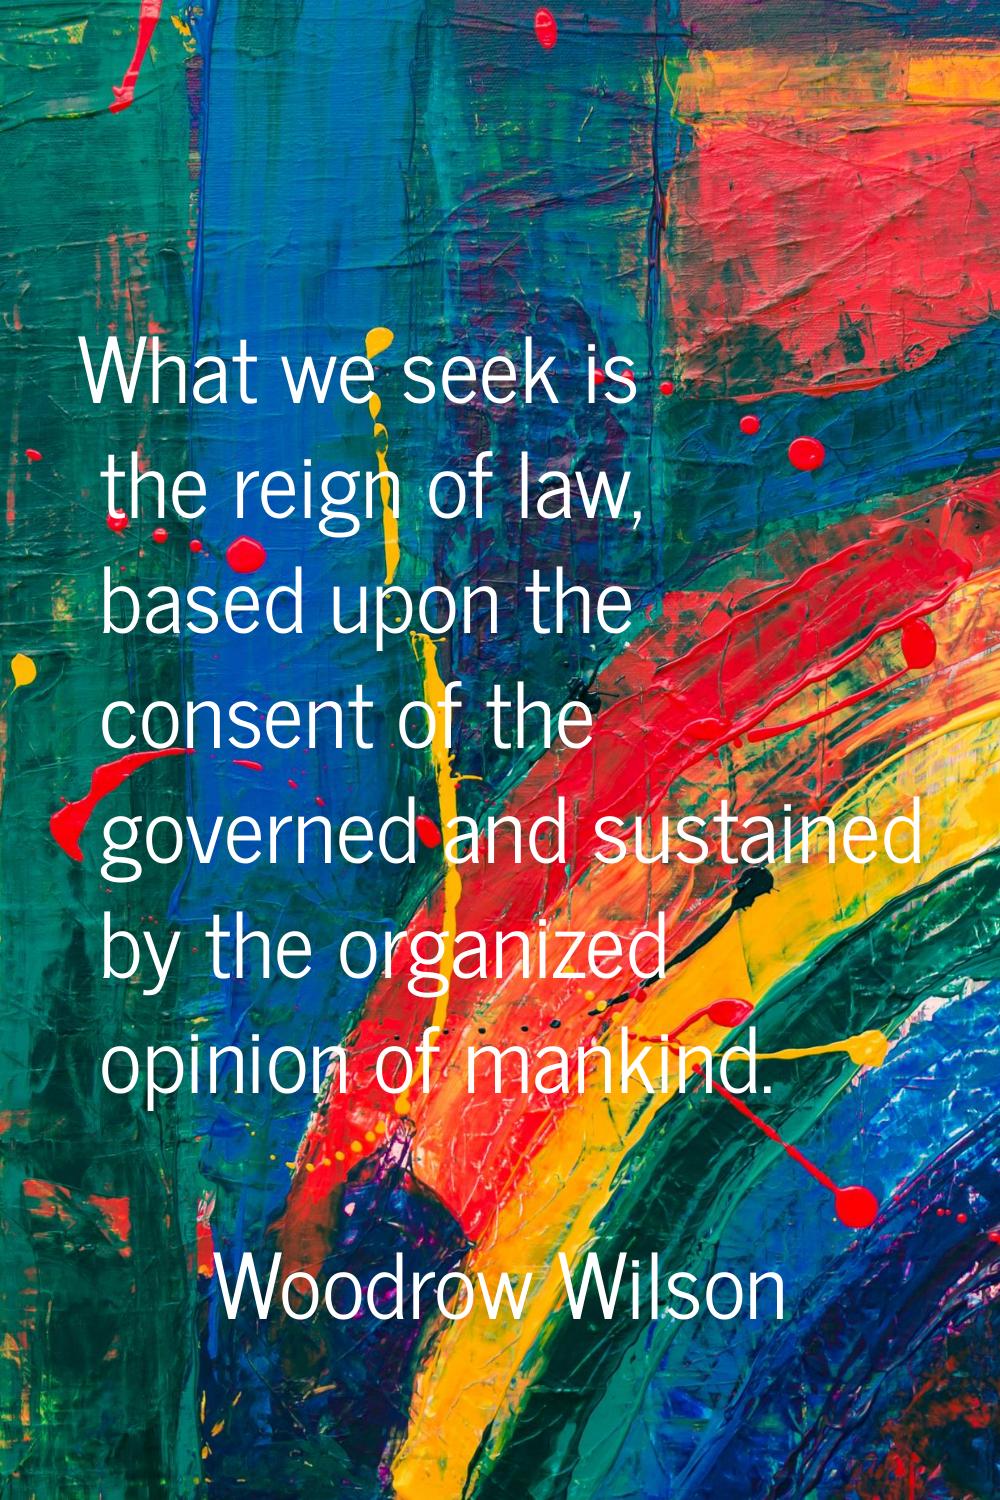 What we seek is the reign of law, based upon the consent of the governed and sustained by the organ